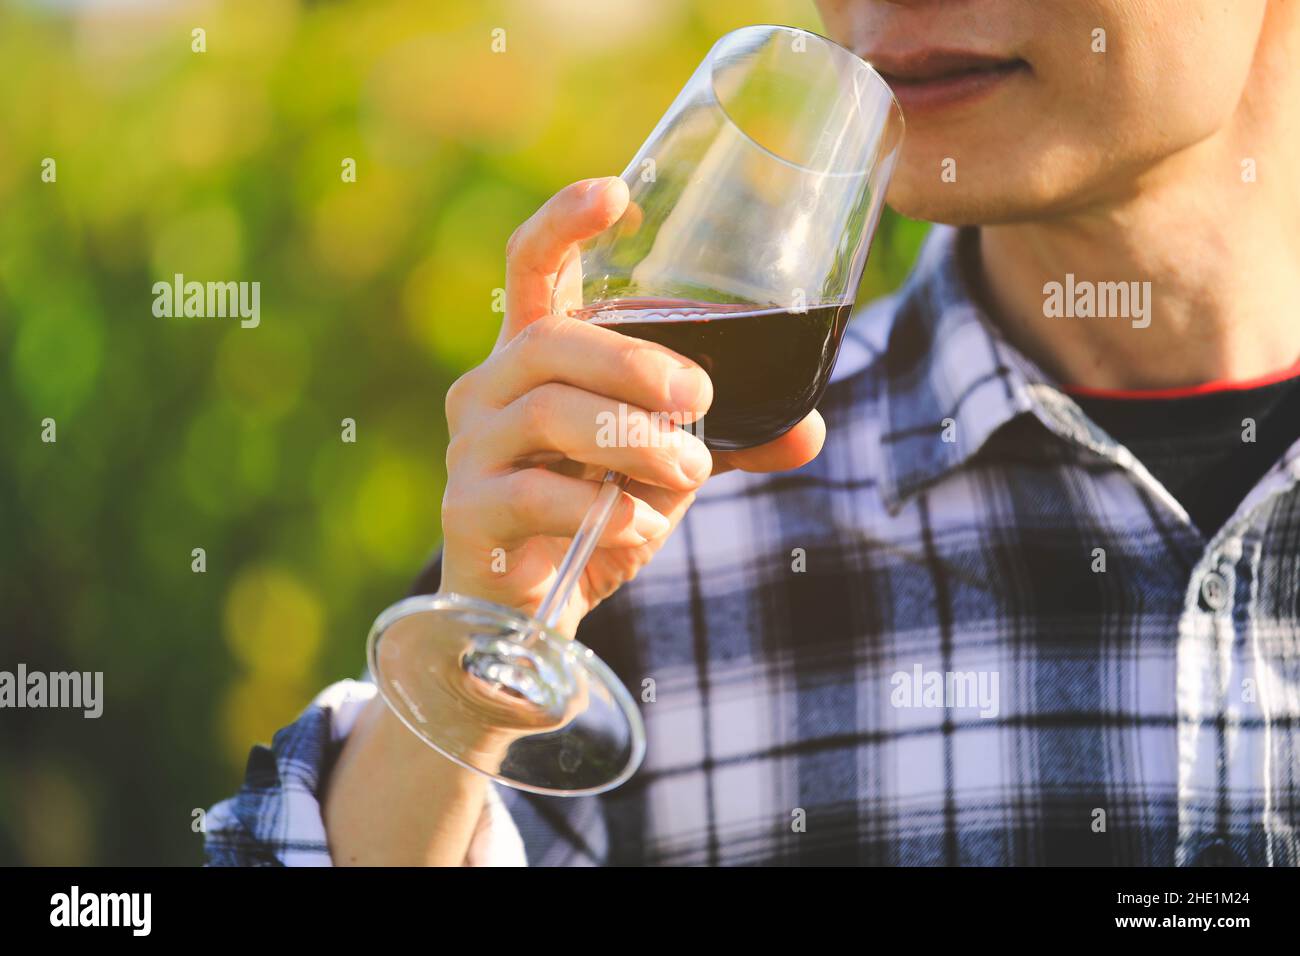 Selective focus on wine glass, man holding red wine glass with green nature background, celebration concept Stock Photo